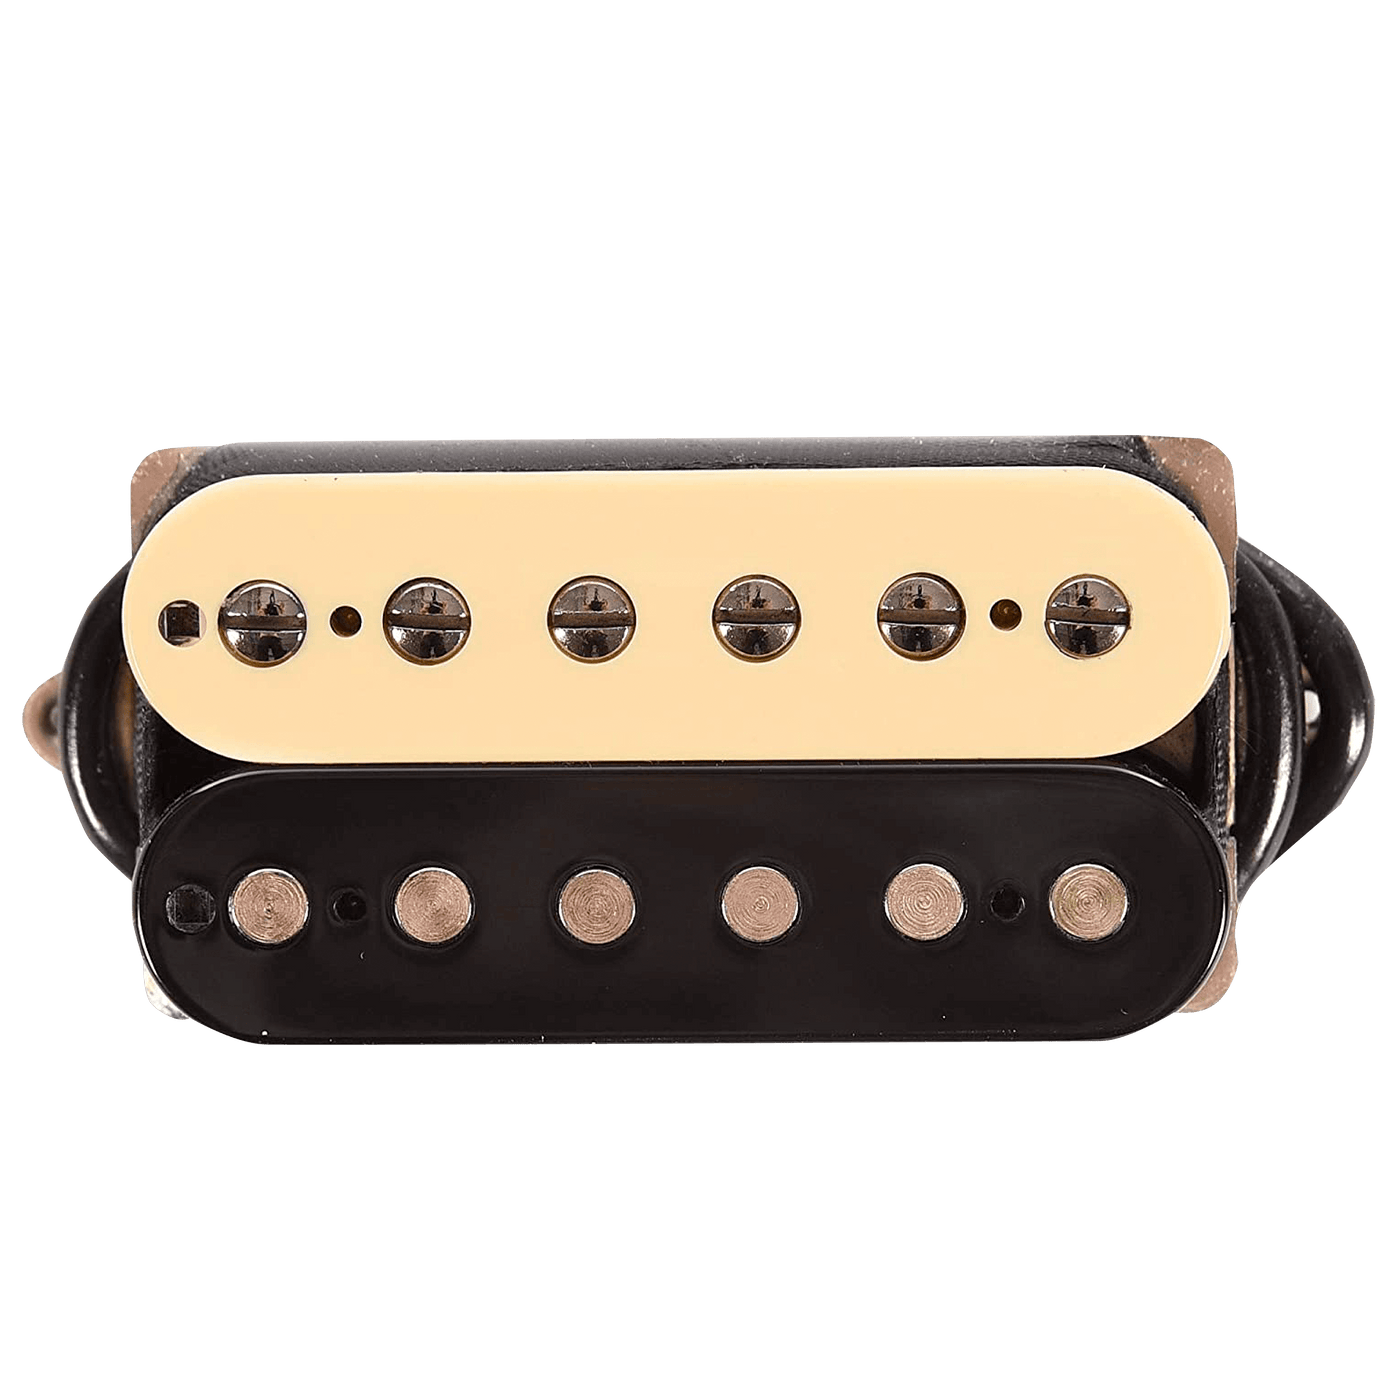 Suhr SSV Humbucker Zebra (Neck) - $149990 - Gearhub - “We are happy to introduce the new Thornbucker + bridge pickup. It retains all the clarity, warmth, character, and mojo of the original Thornbuckers, and adds a bit more power and oomph. Great for players that like a slightly overwound PAF-type tone!”. “We’re overjoyed with the enthusiasm from players for the Thornbucker humbucking pickups! The pickups have been a resounding success, garnering praise for their extraordinary tone and balance. I’m truly ho